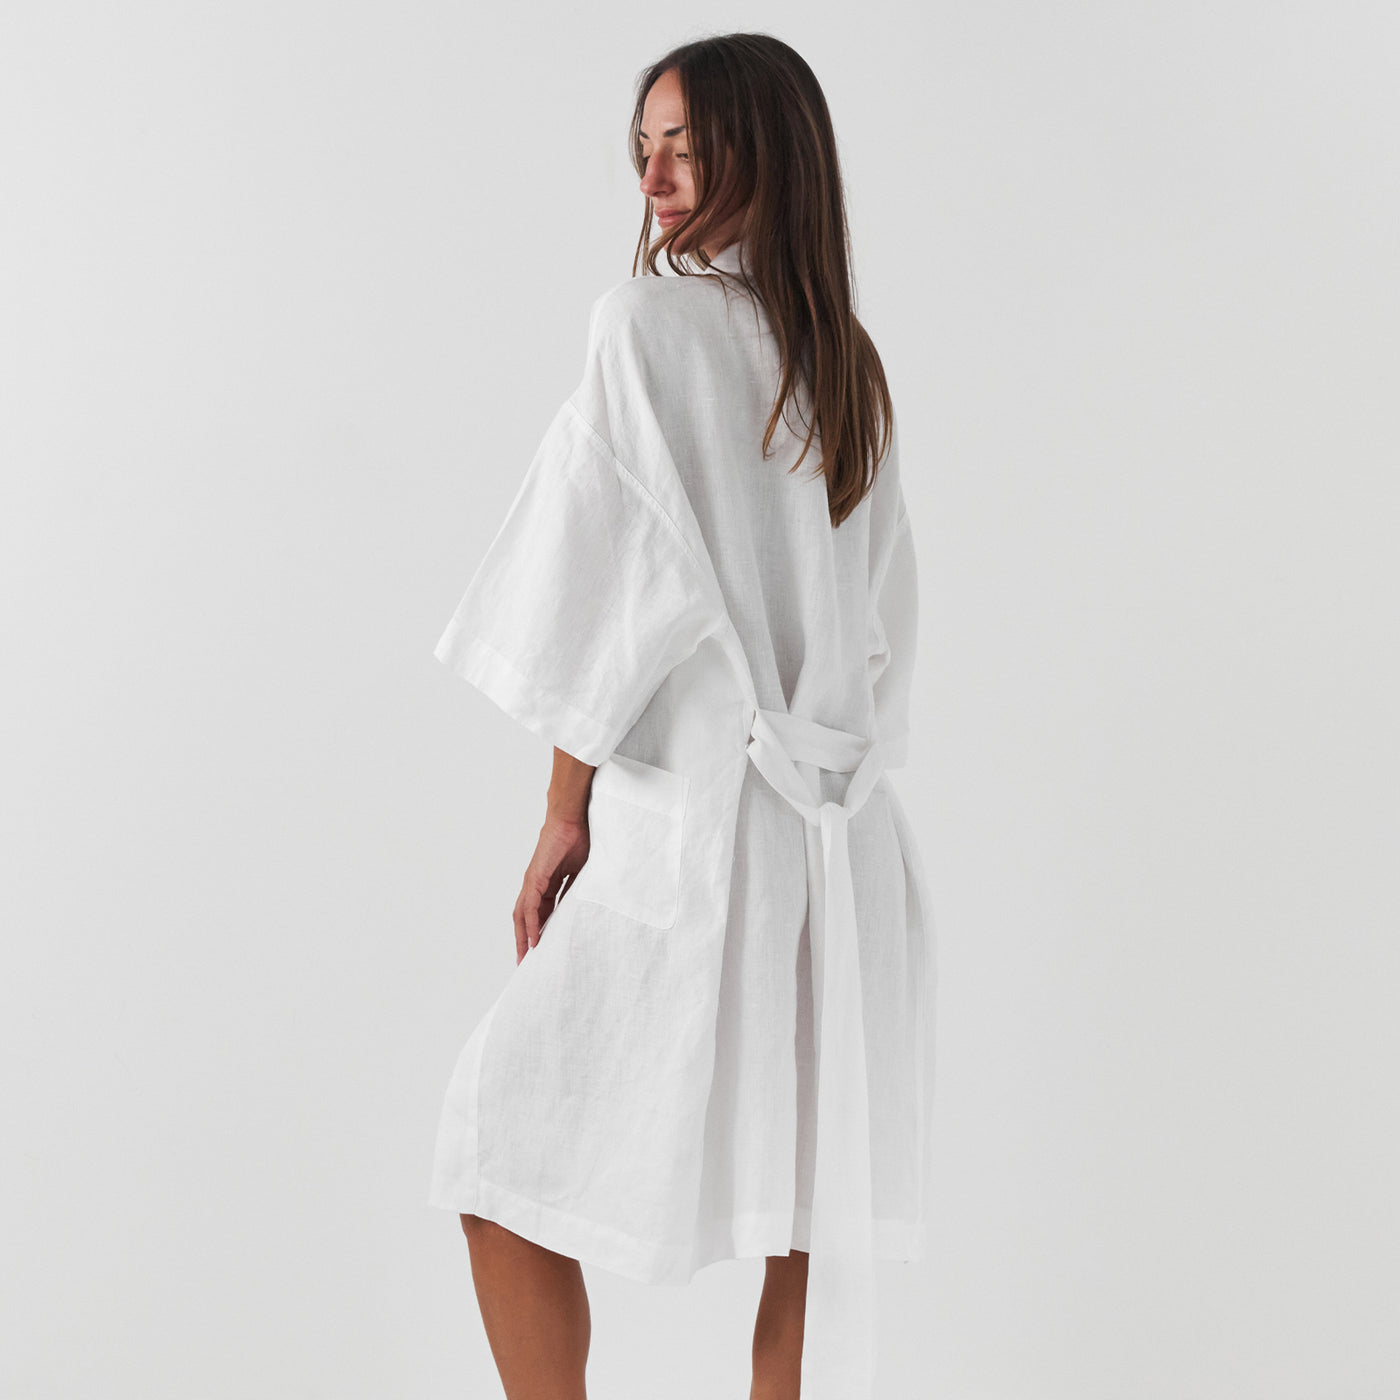 French Flax Linen Robe in White